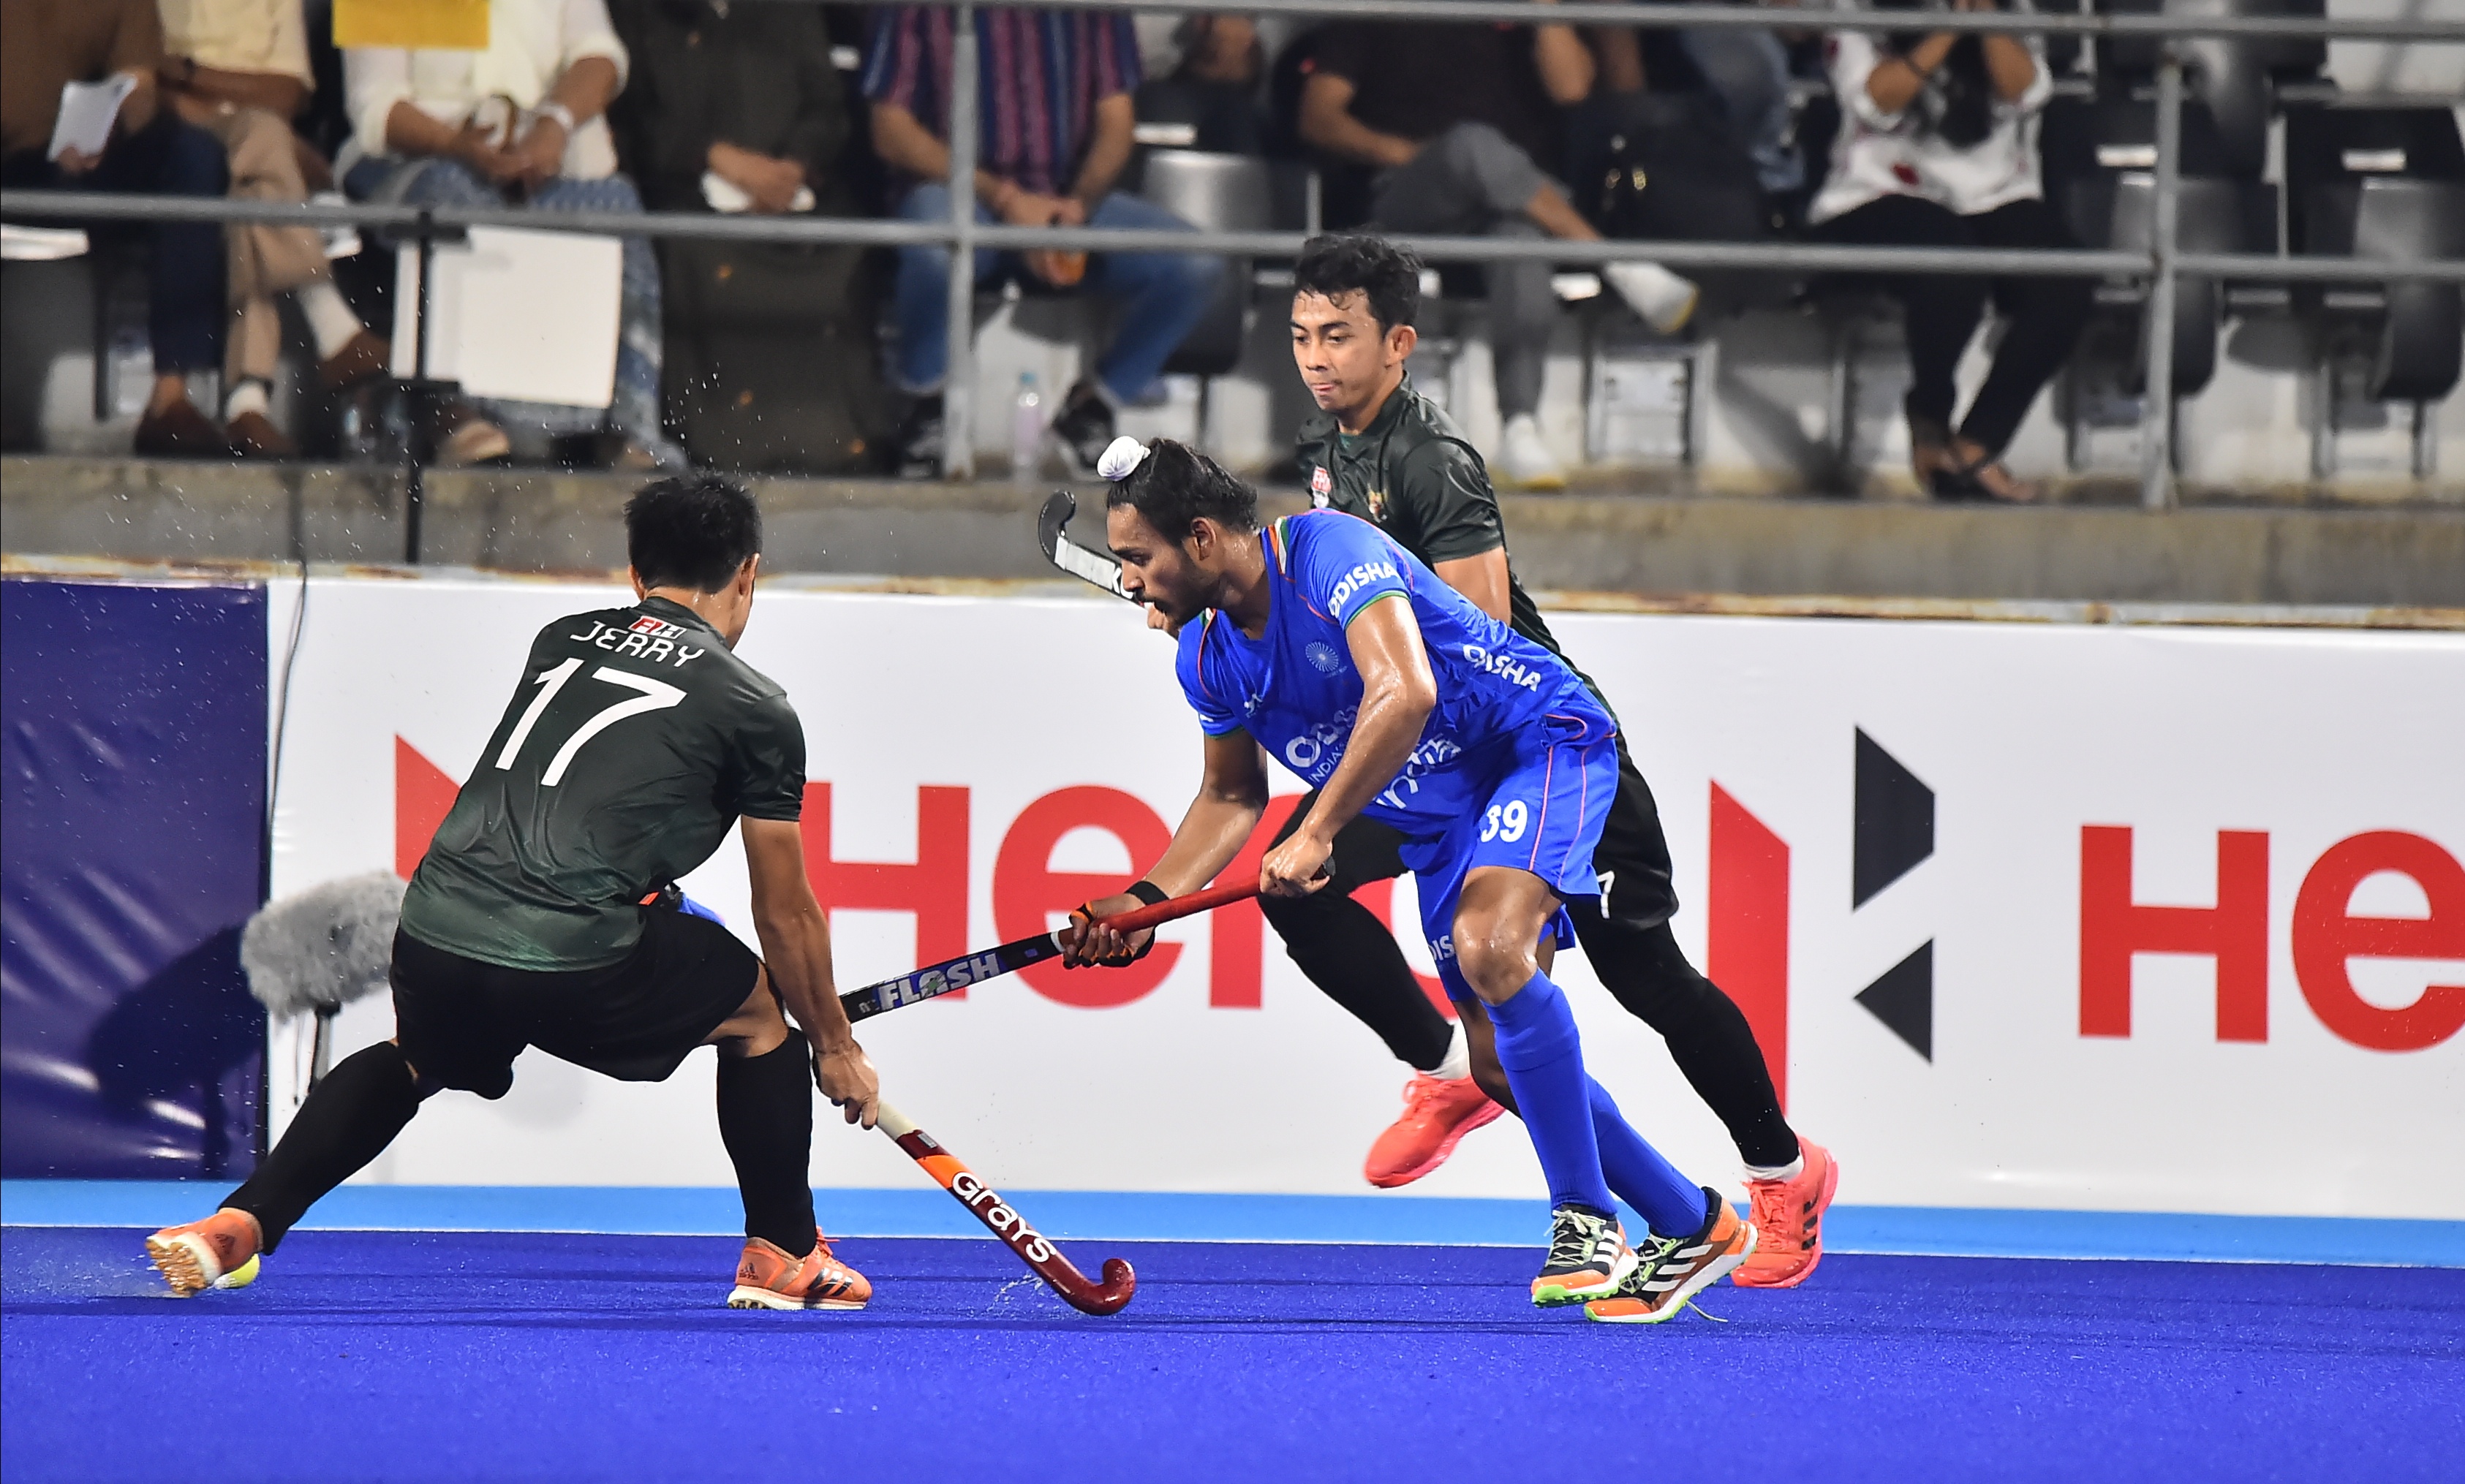 India Men's Hockey Team pick stunning 16-0 win over hosts Indonesia to Qualify for Super 4s, while Japan beat Pakistan